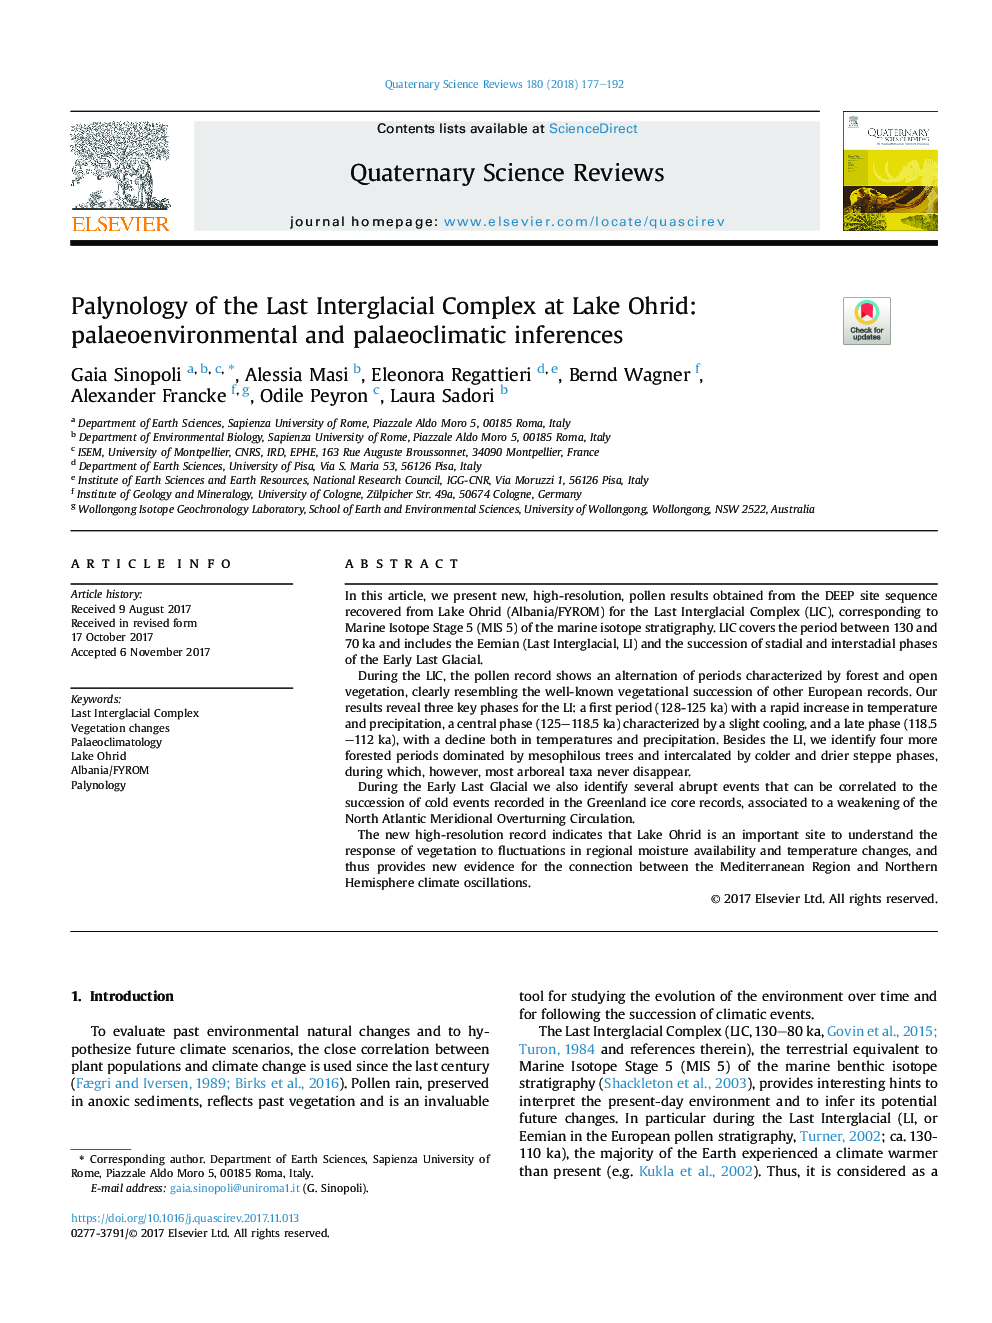 Palynology of the Last Interglacial Complex at Lake Ohrid: palaeoenvironmental and palaeoclimatic inferences